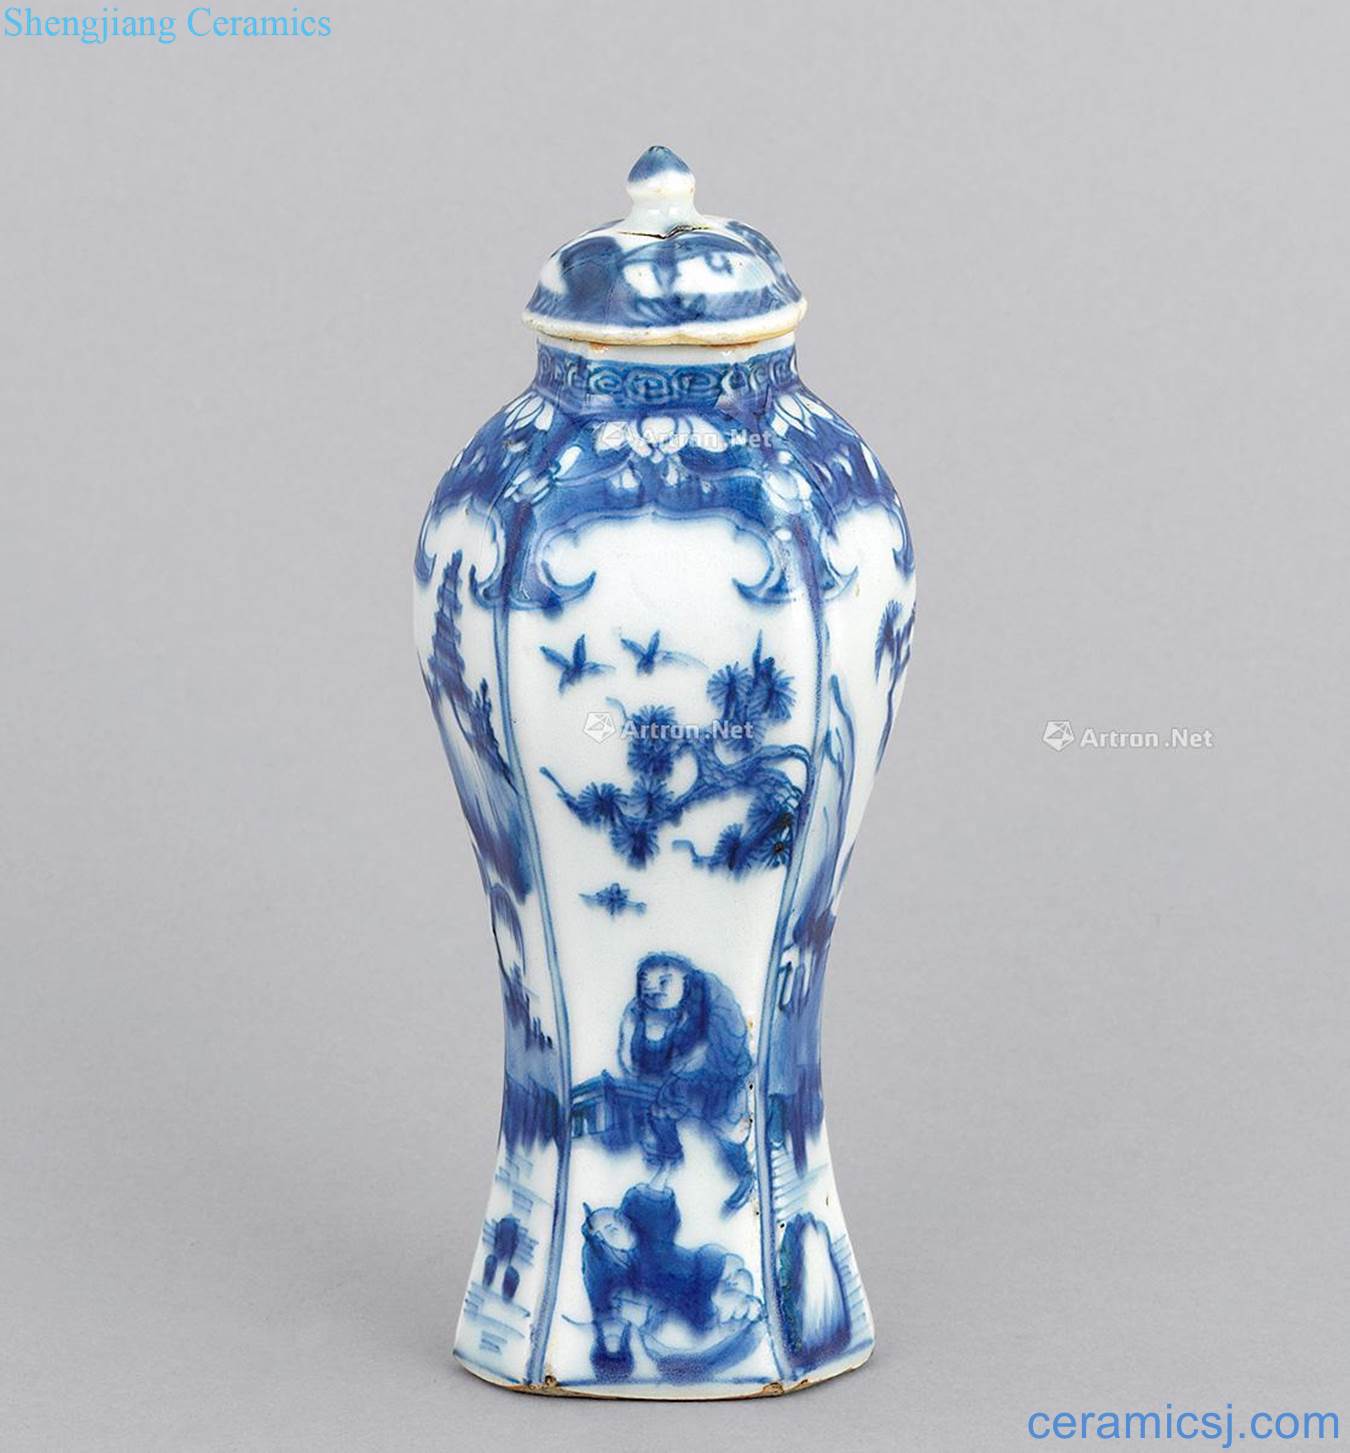 In the 18th century Blue and white bottle cap